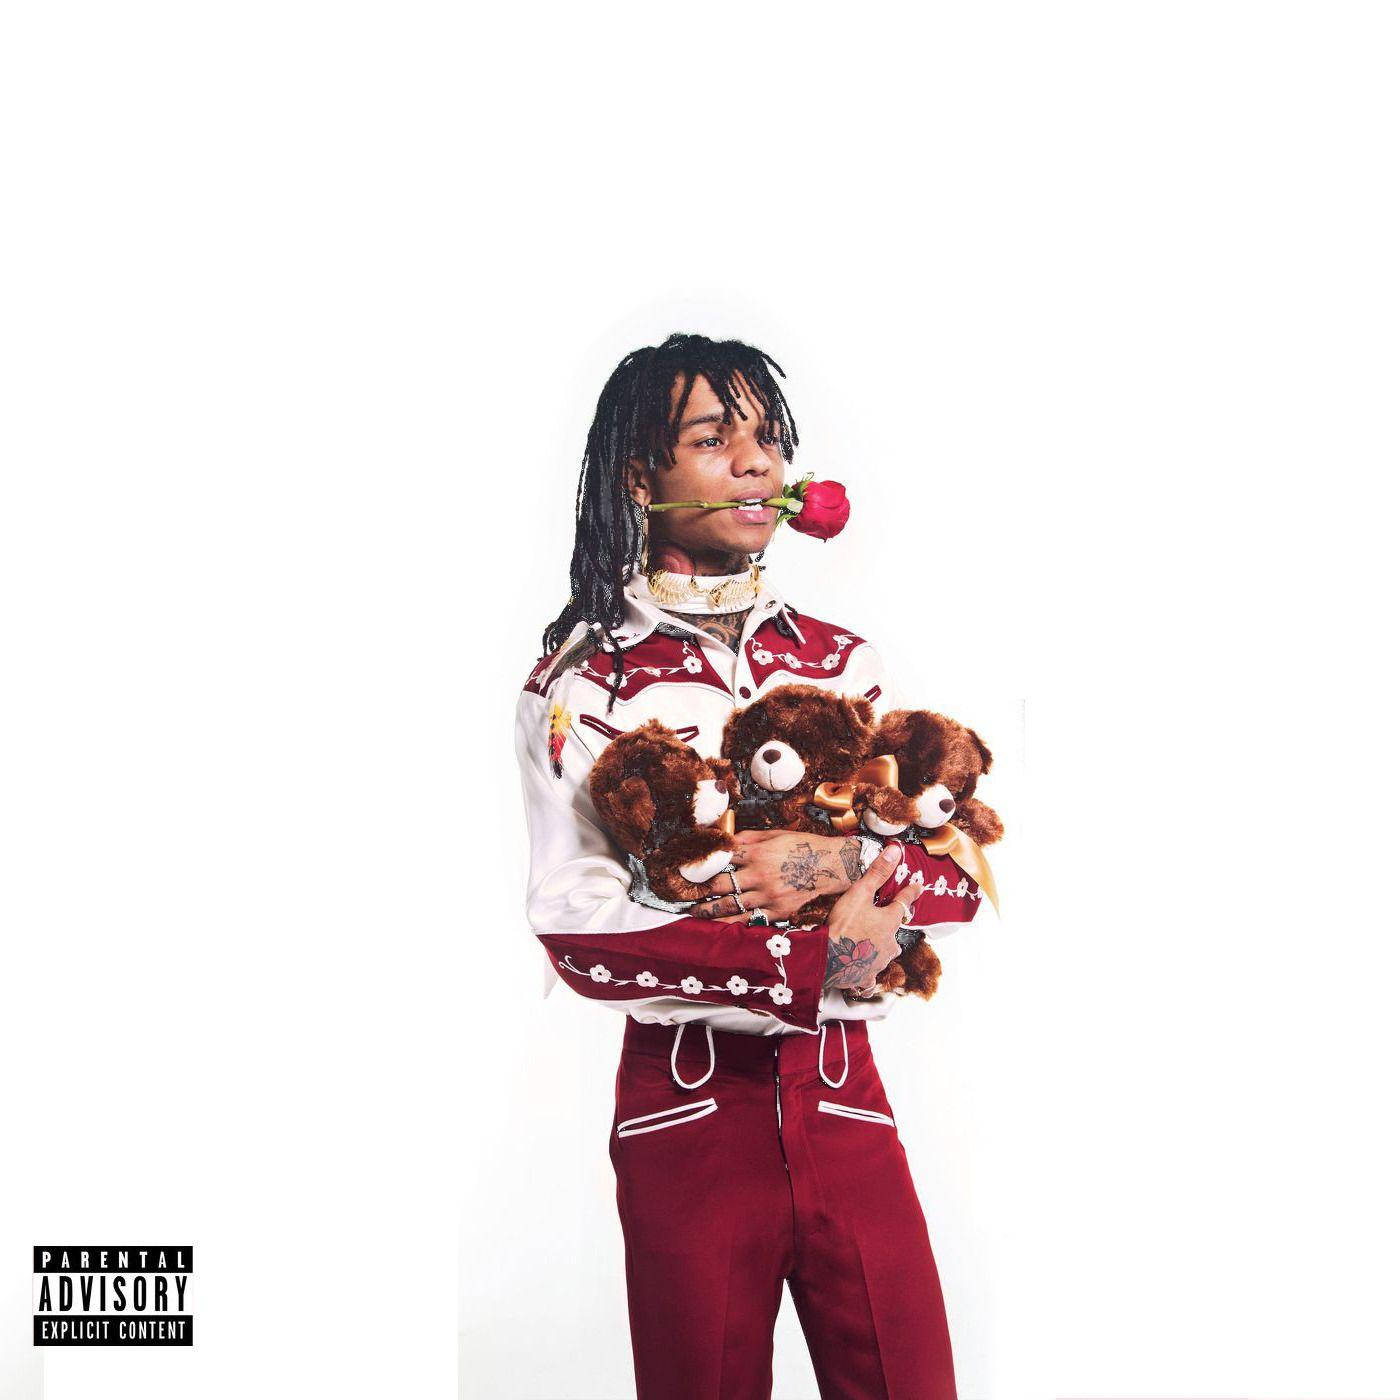 Swae Lee And Teddy Bears Background